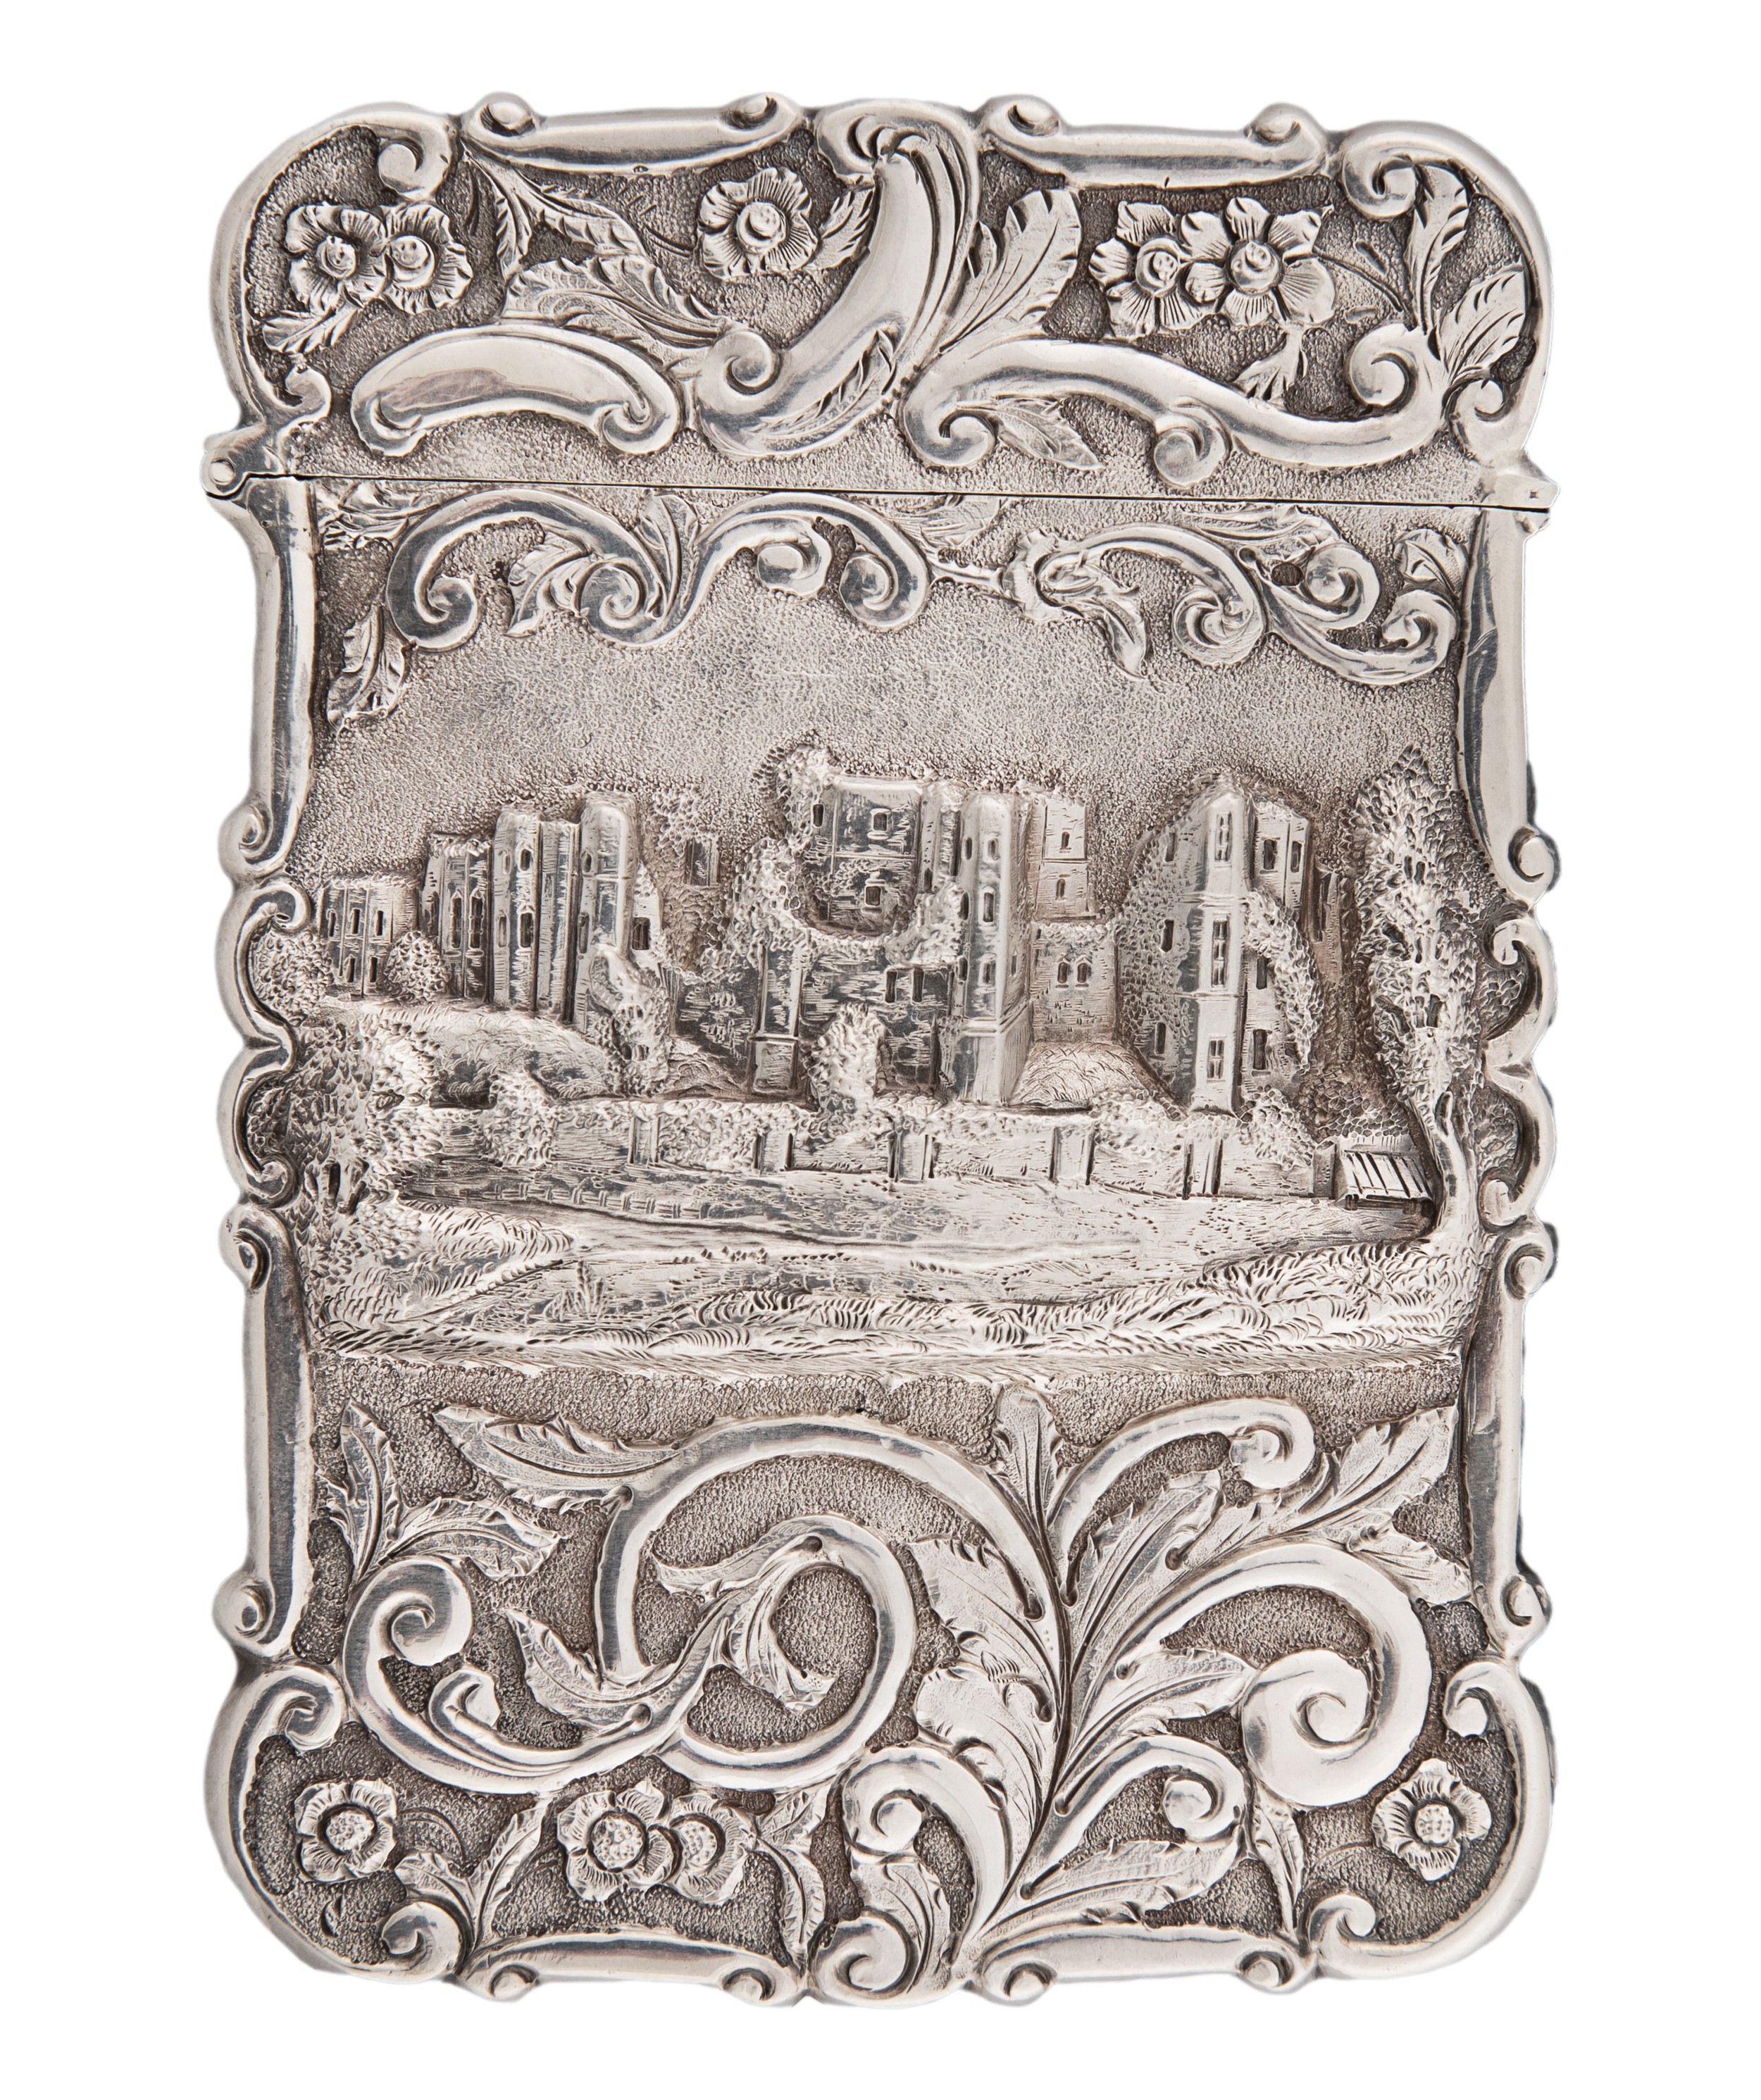 Birmingham, Late 18th/Early 19th Century, A silver embossed card case depicting Kenilworth Castle